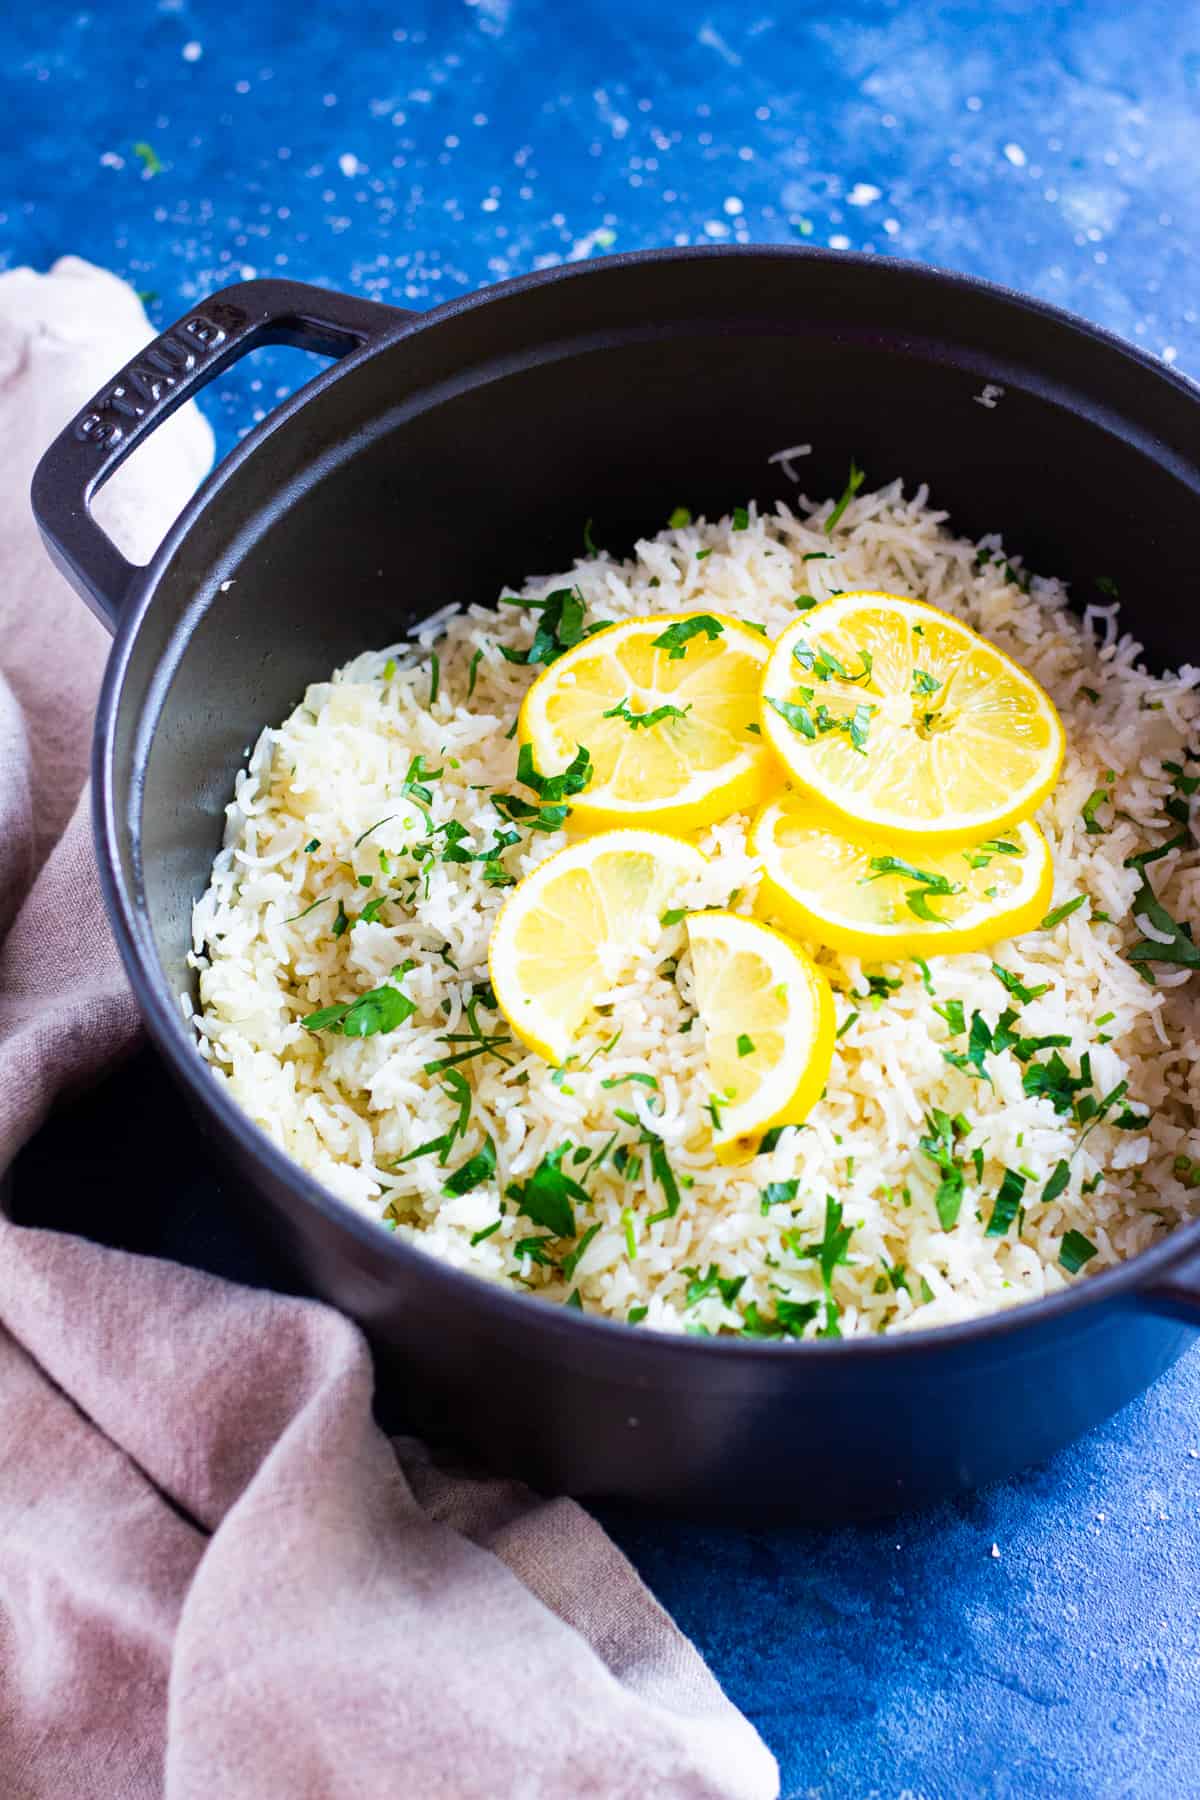 This Greek lemon rice is ready in 30 minutes. The lemon and garlic add a lot of flavor to this Greek-inspired dish, which can be served on the side or as the main meal!
